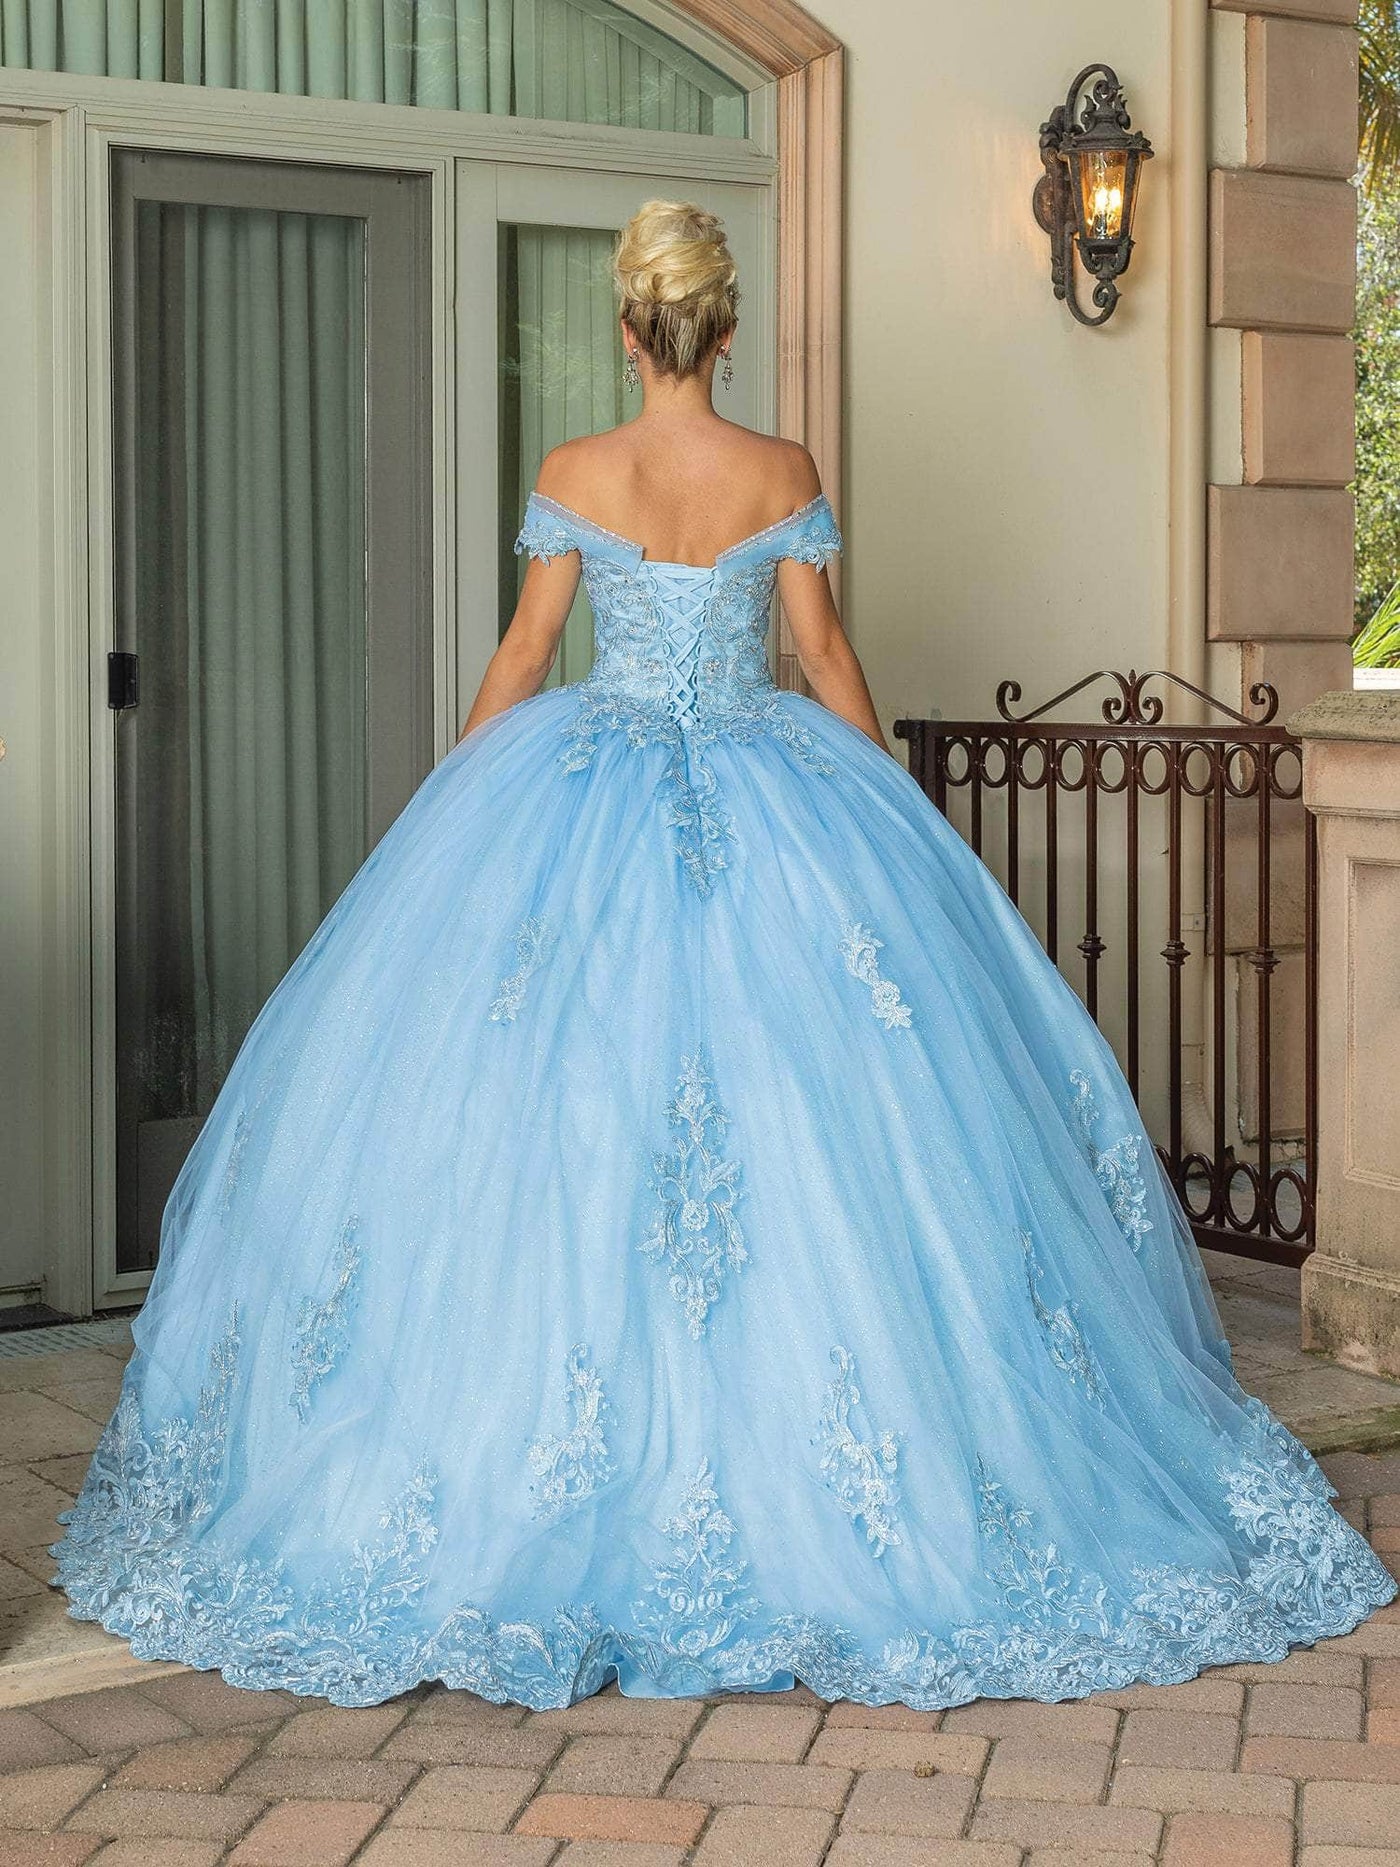 Dancing Queen 1699 - Lace Detail Quinceanera Ballgown Special Occasion Dress